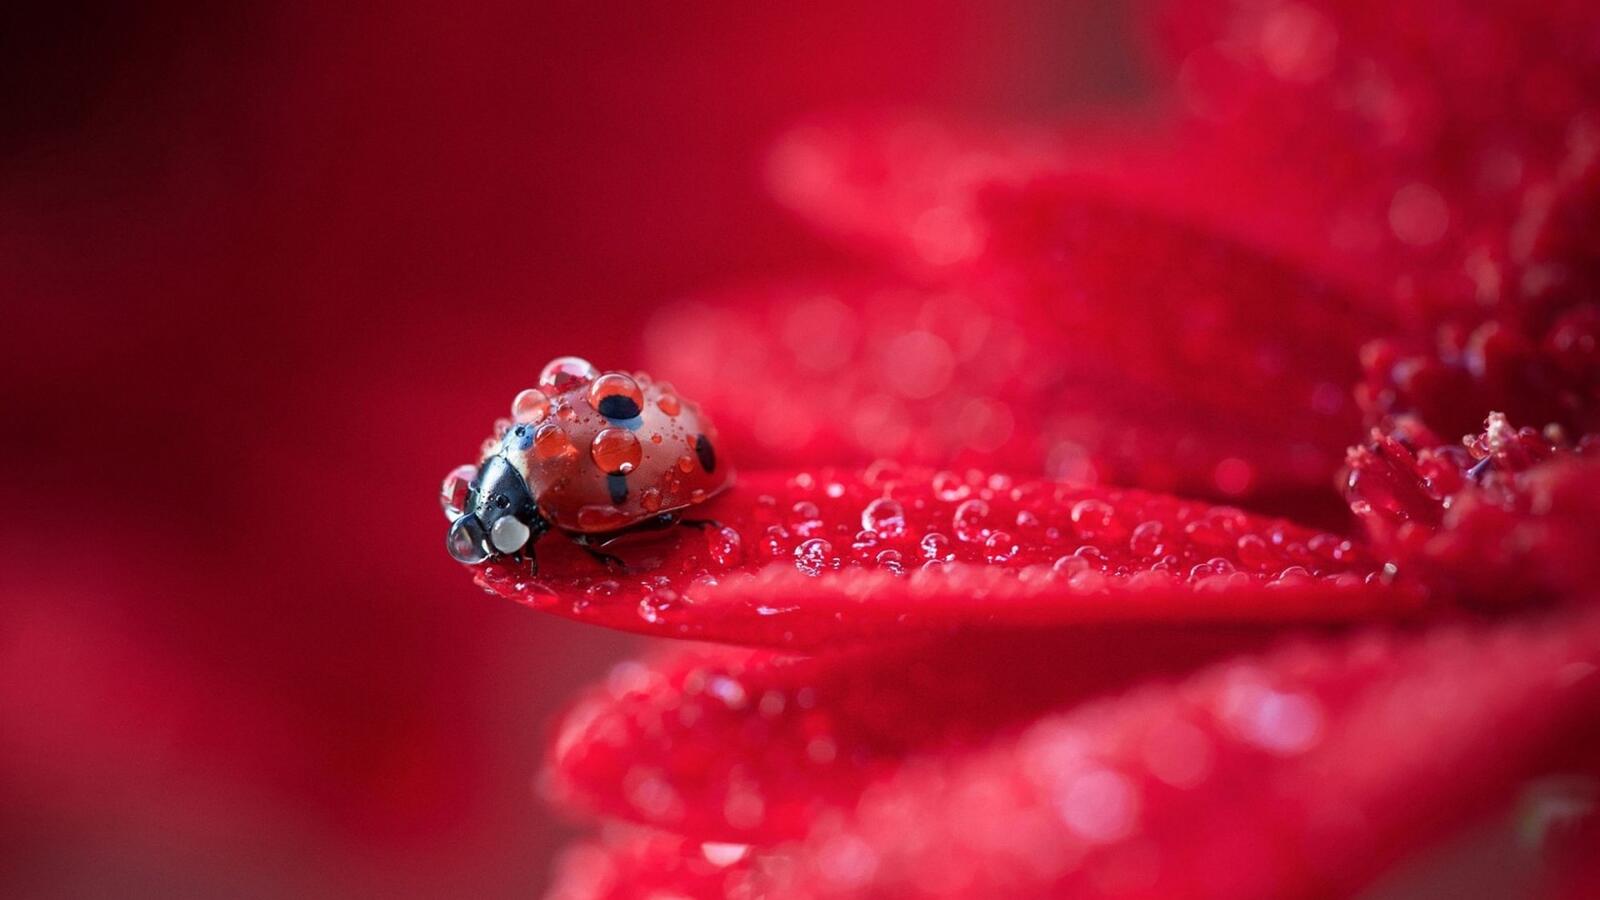 Wallpapers ladybug drops of water red on the desktop